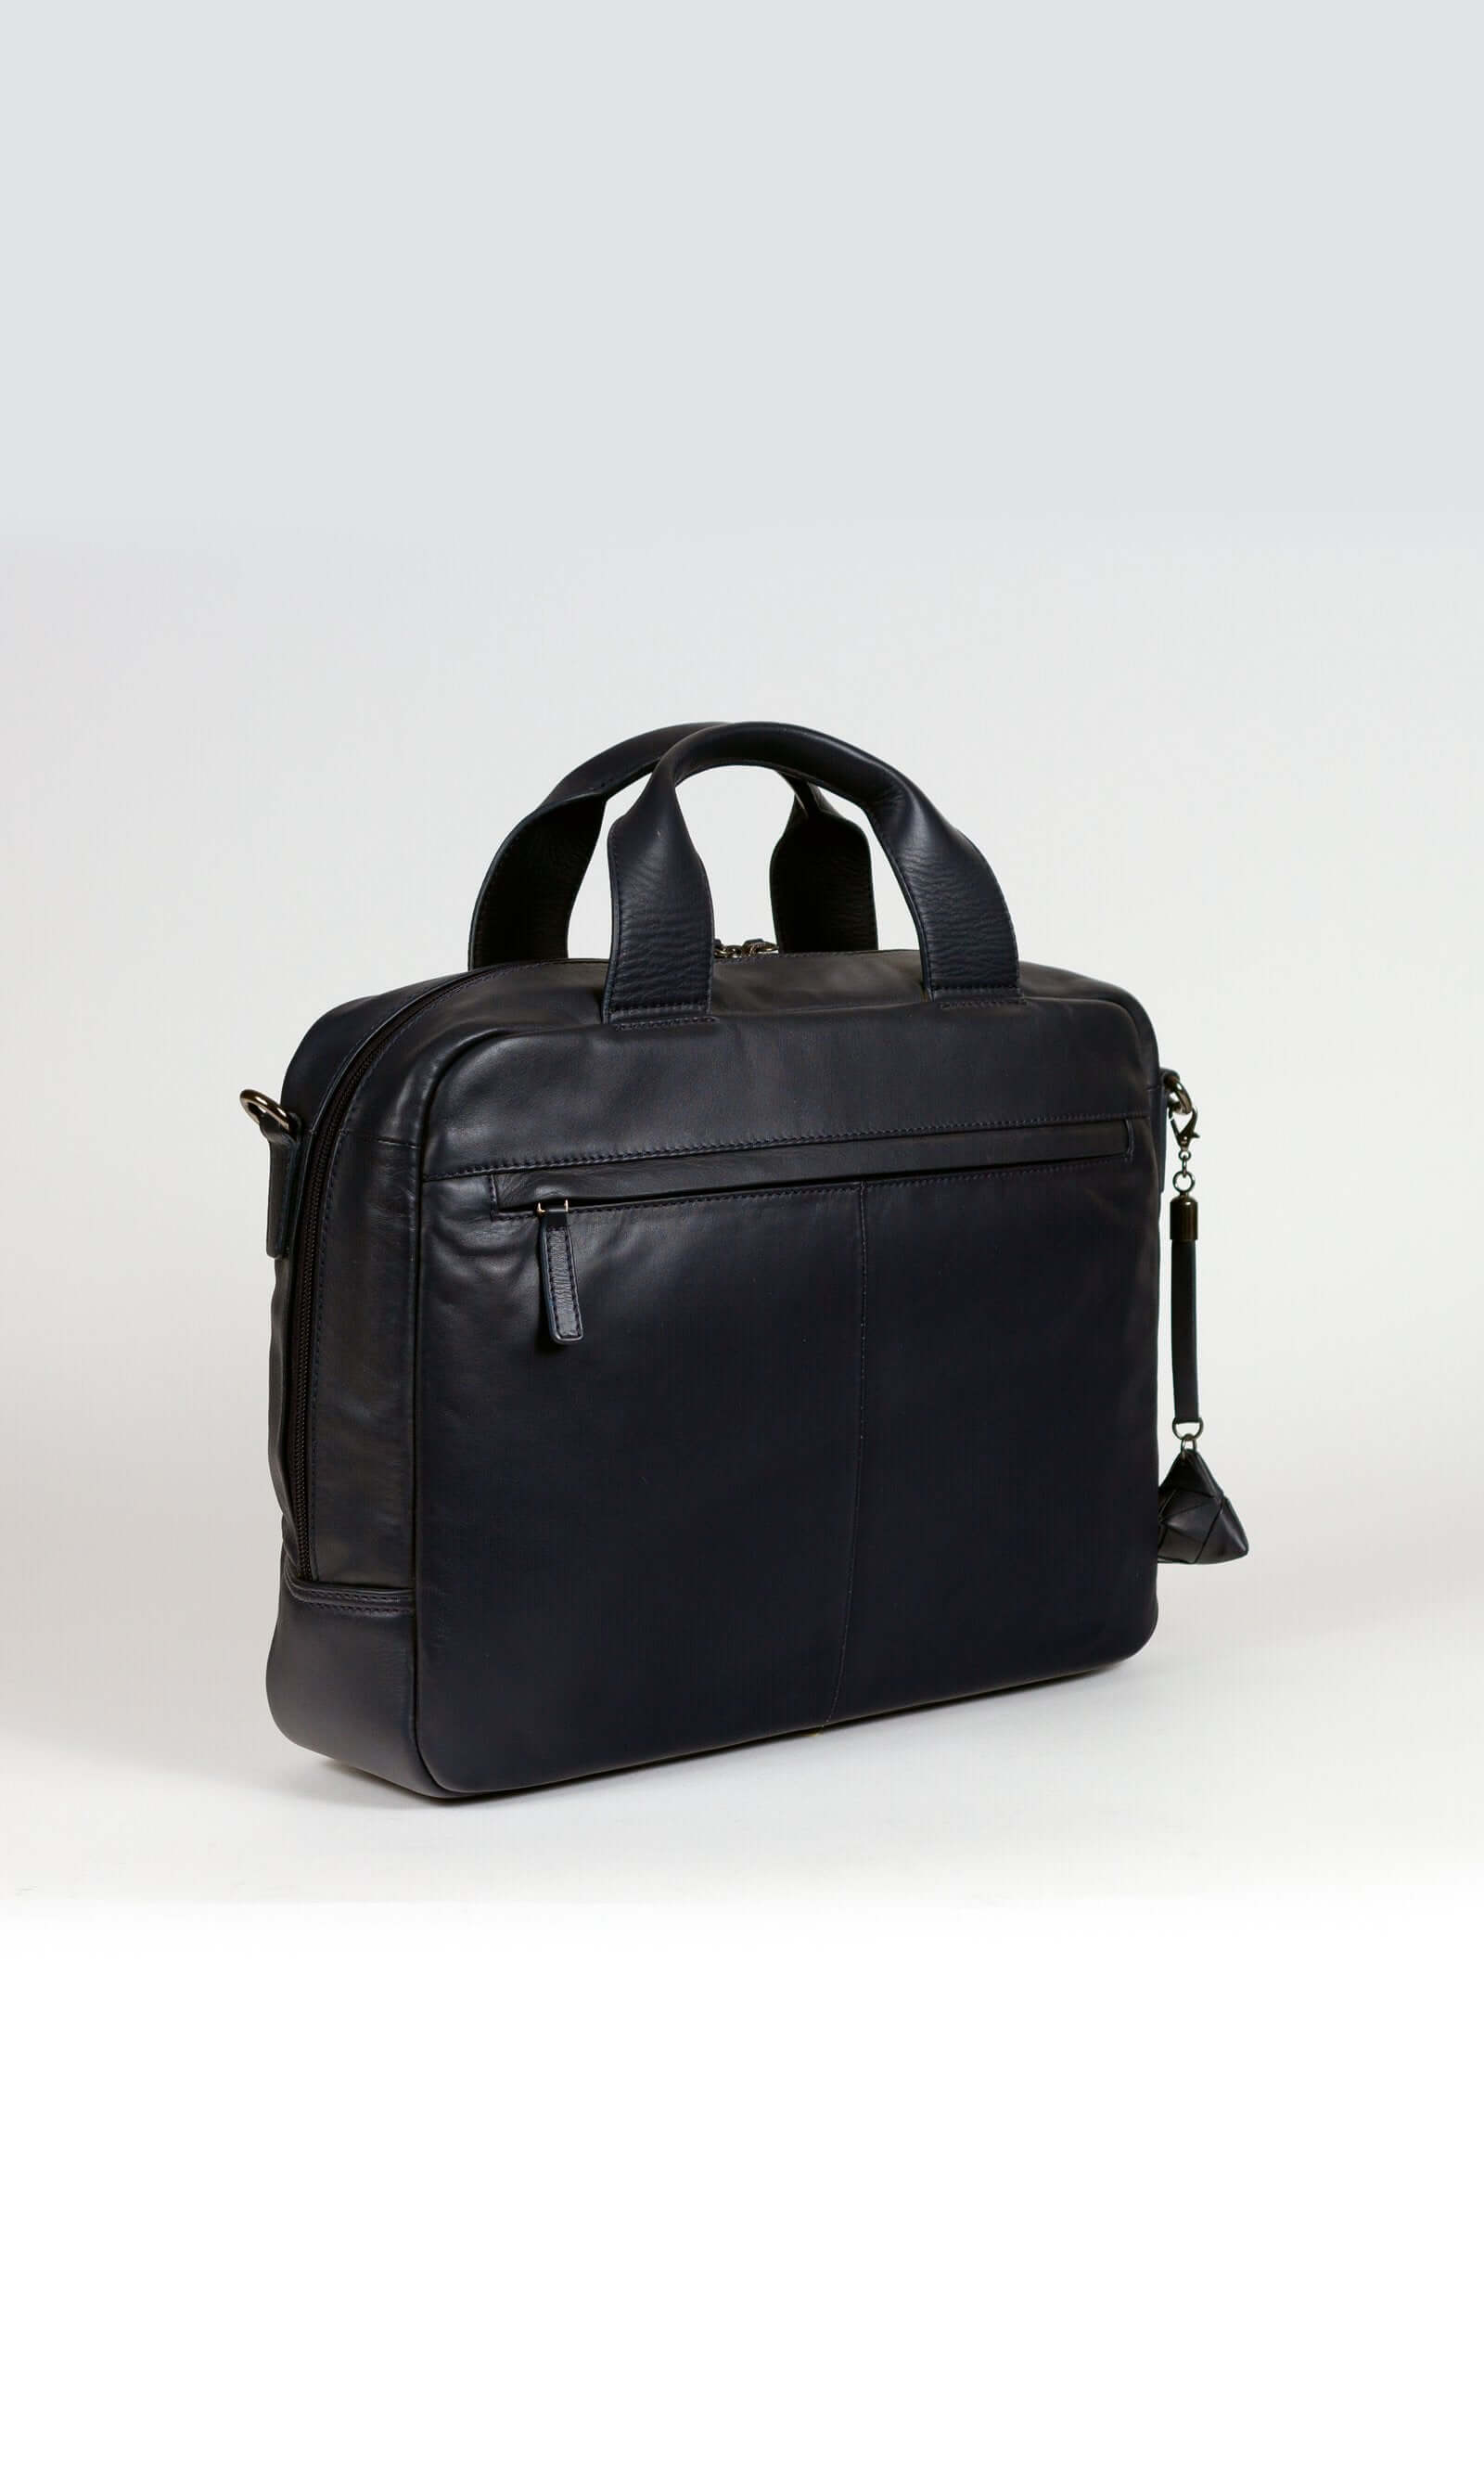 BEON.COM.AU The Jost Alice Sara Ott Business briefcase is a leather bag made in Europe from premium European leathers and fabrics. Fits laptops up to 33cm x 21cm x 2cm Laptop compartment has velcro tab, a zipped pocket, a mobile phone pocket Fold-out trolley attachment function Reinforced bottom Large main c... Jost at BEON.COM.AU